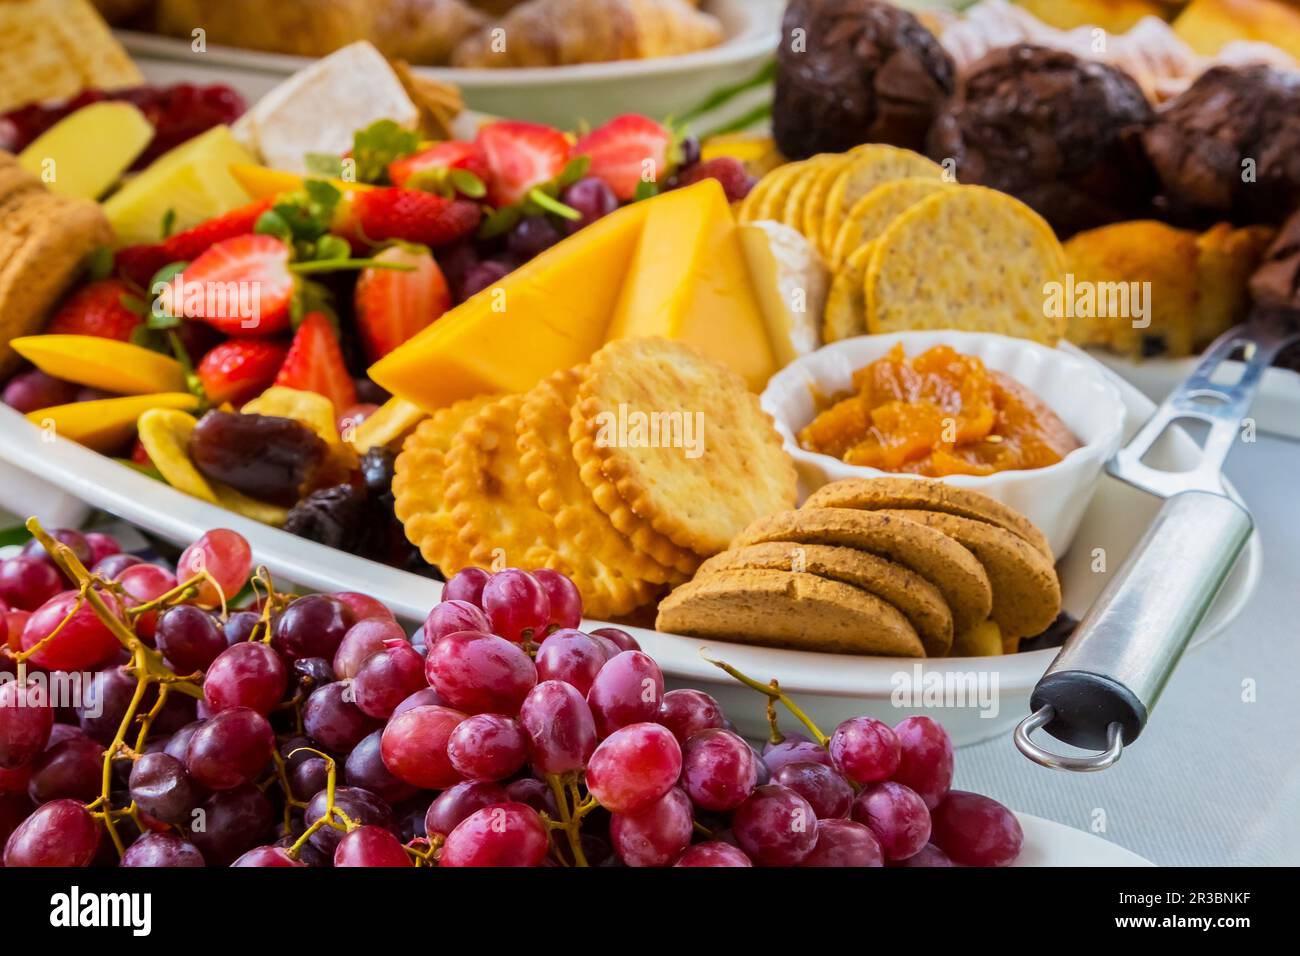 Fruit Salad and cheese board at Spring Festival picnic event Stock Photo